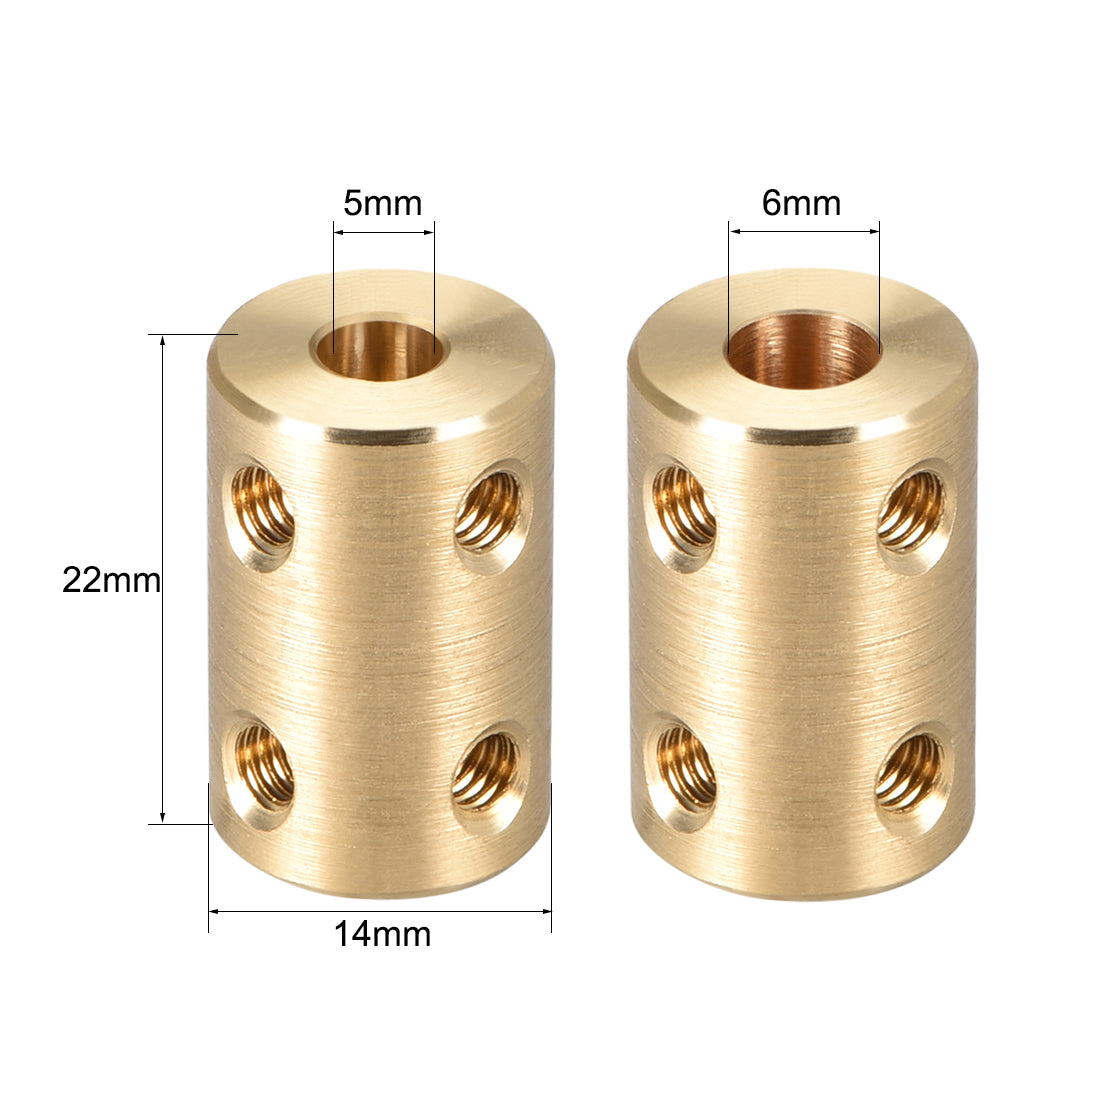 uxcell Uxcell Shaft Coupling 5mm to 6mm Bore L22xD14 Robot Motor Wheel Rigid Coupler Connector Gold Tone 2 Pcs